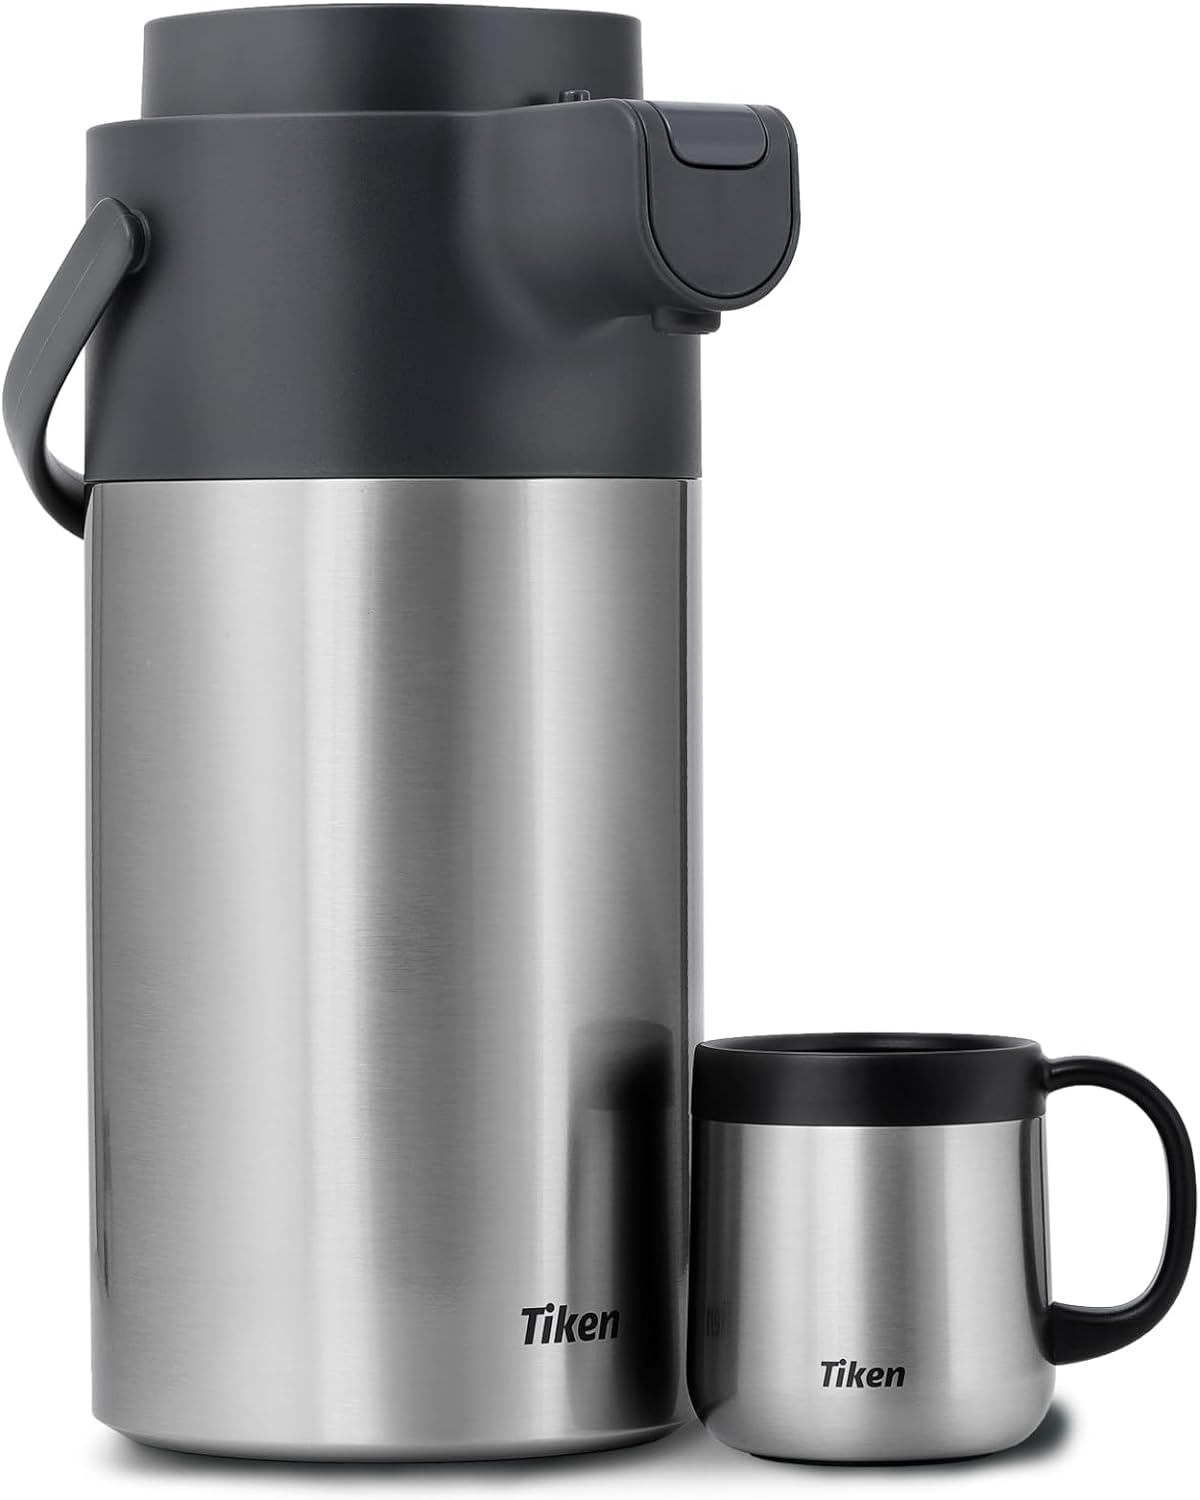 Tiken 34 oz Thermal Coffee Carafe, Stainless Steel Insulated Vacuum Coffee Carafes for Keeping Hot, 1 Liter Beverage Dispenser (Silver)